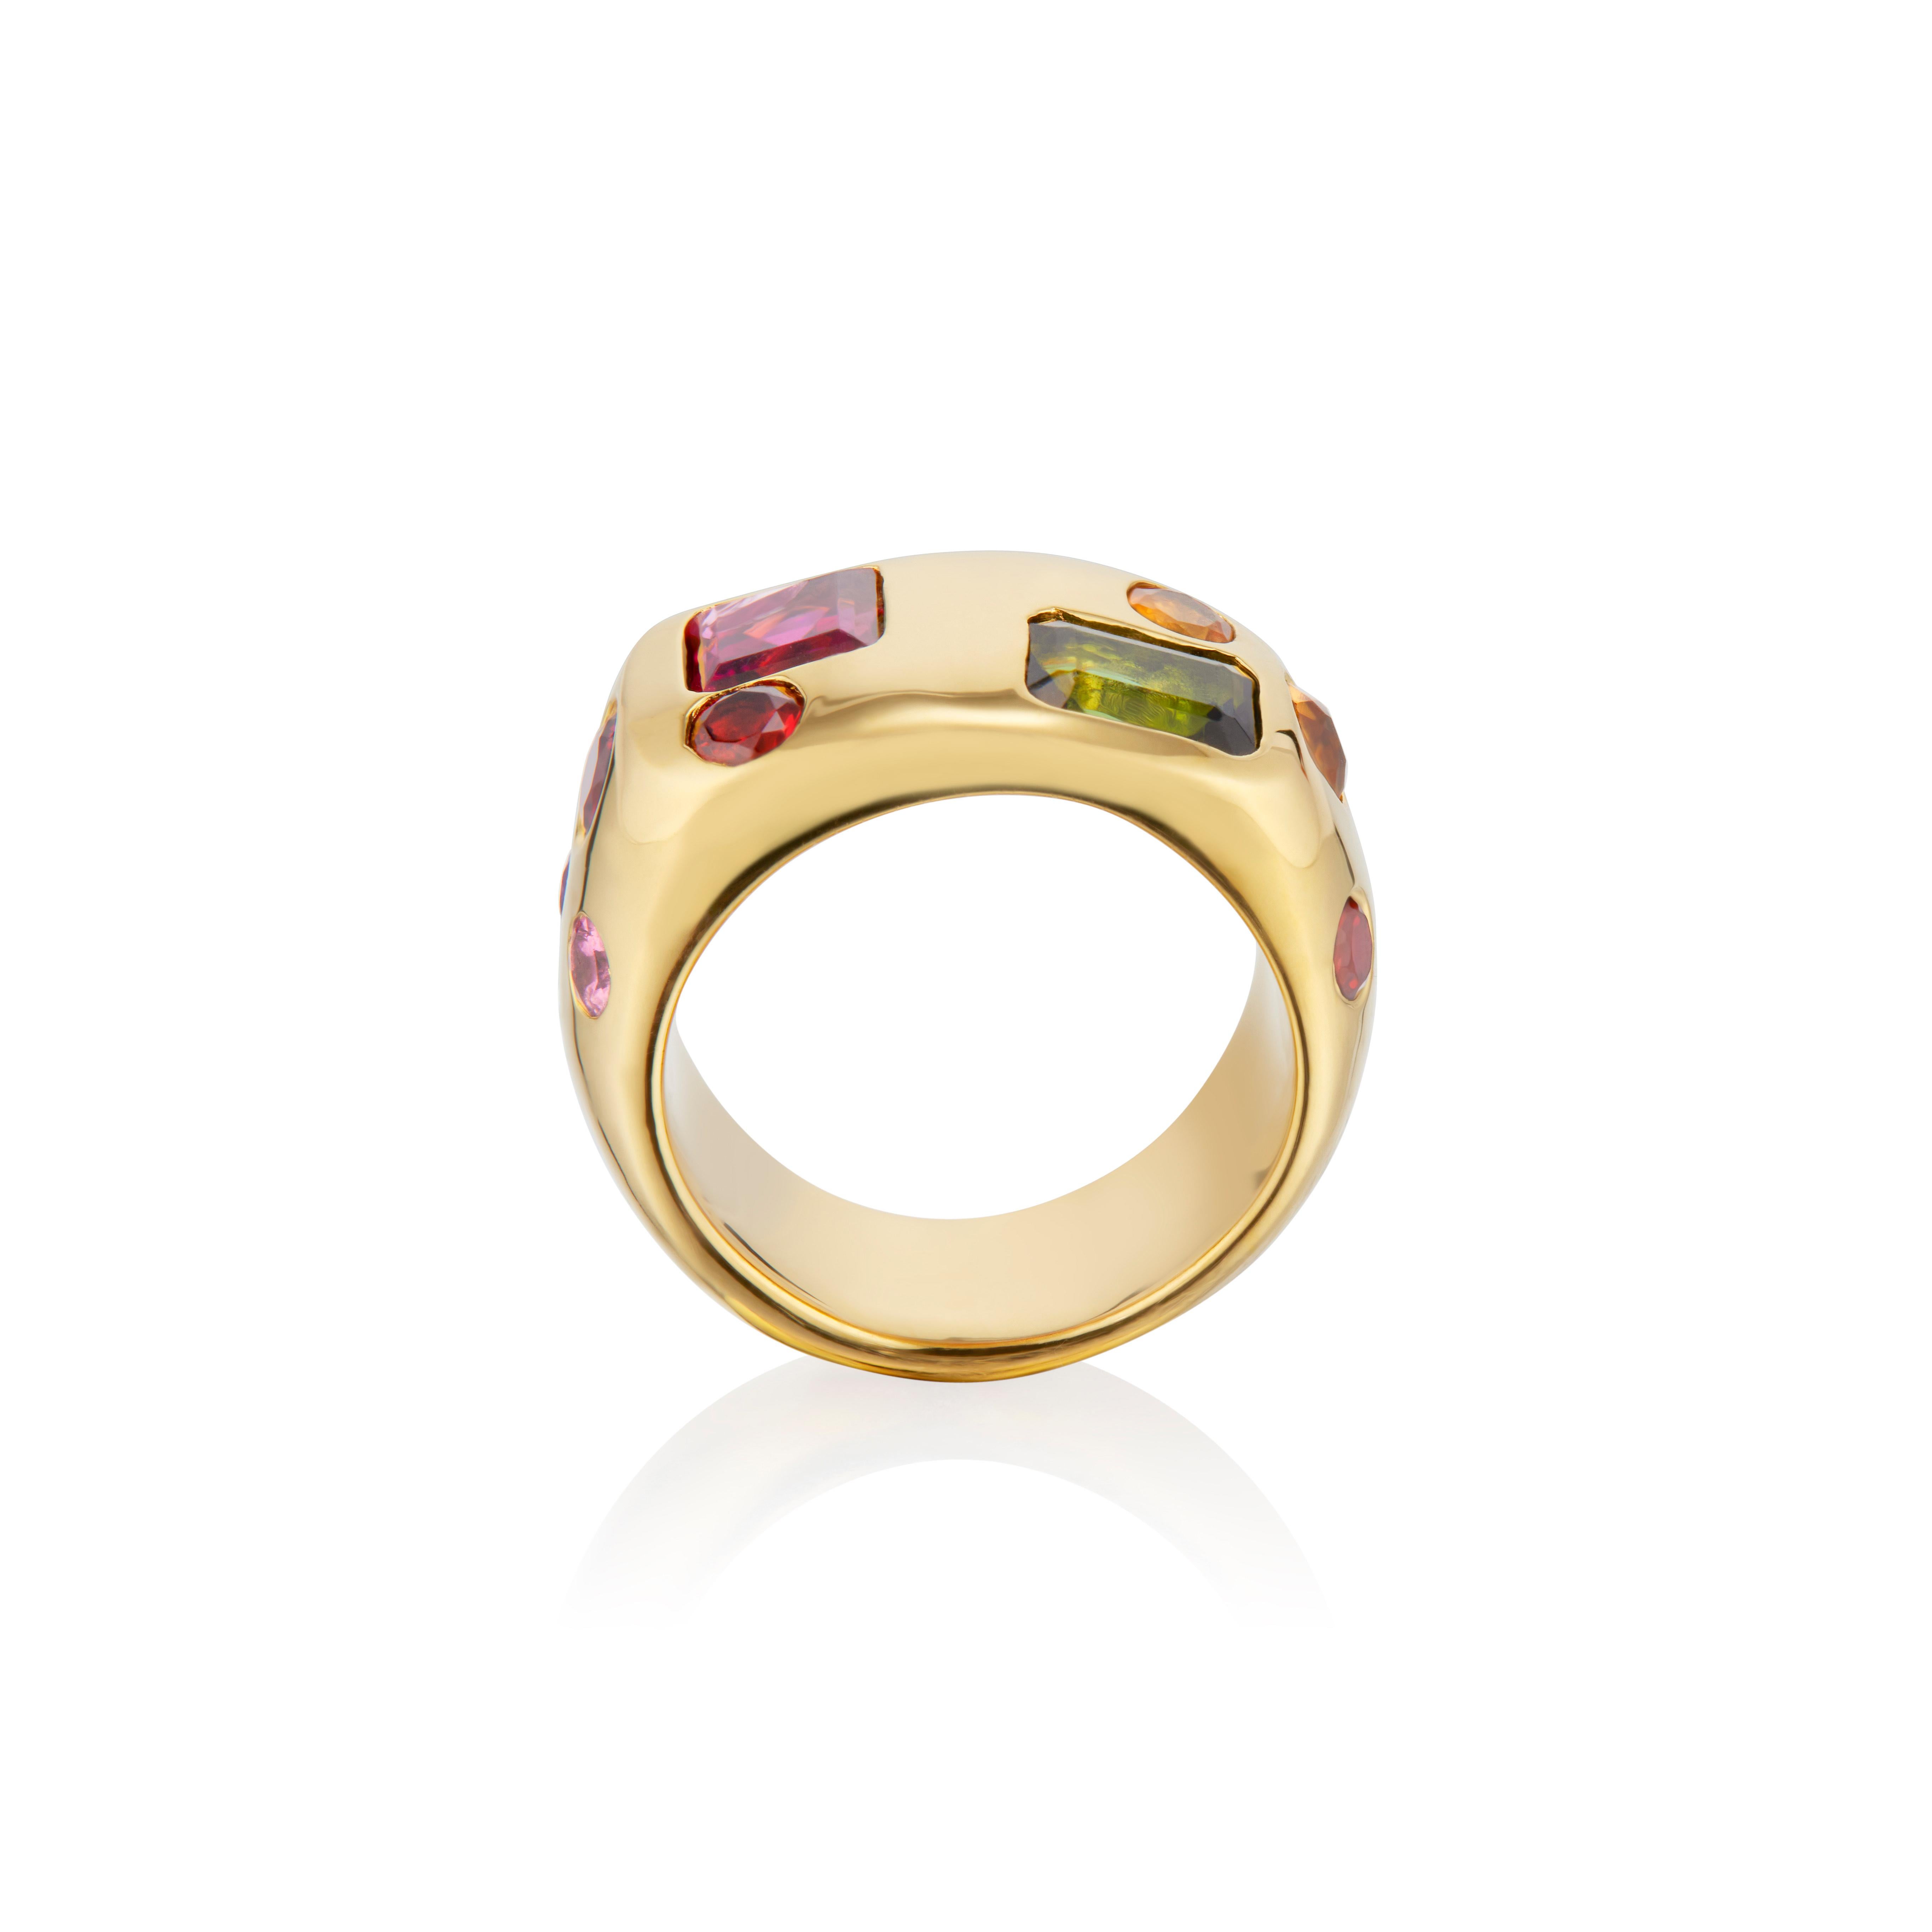 The faceted Semi-Precious version of our signature Mosaic Inlay Signet Ring, this powerful ring is filled with healing properties coming from each stone and is so aesthetically pleasing. 

Stones are as follows: Green Tourmaline, Rhodolite, Peridot,